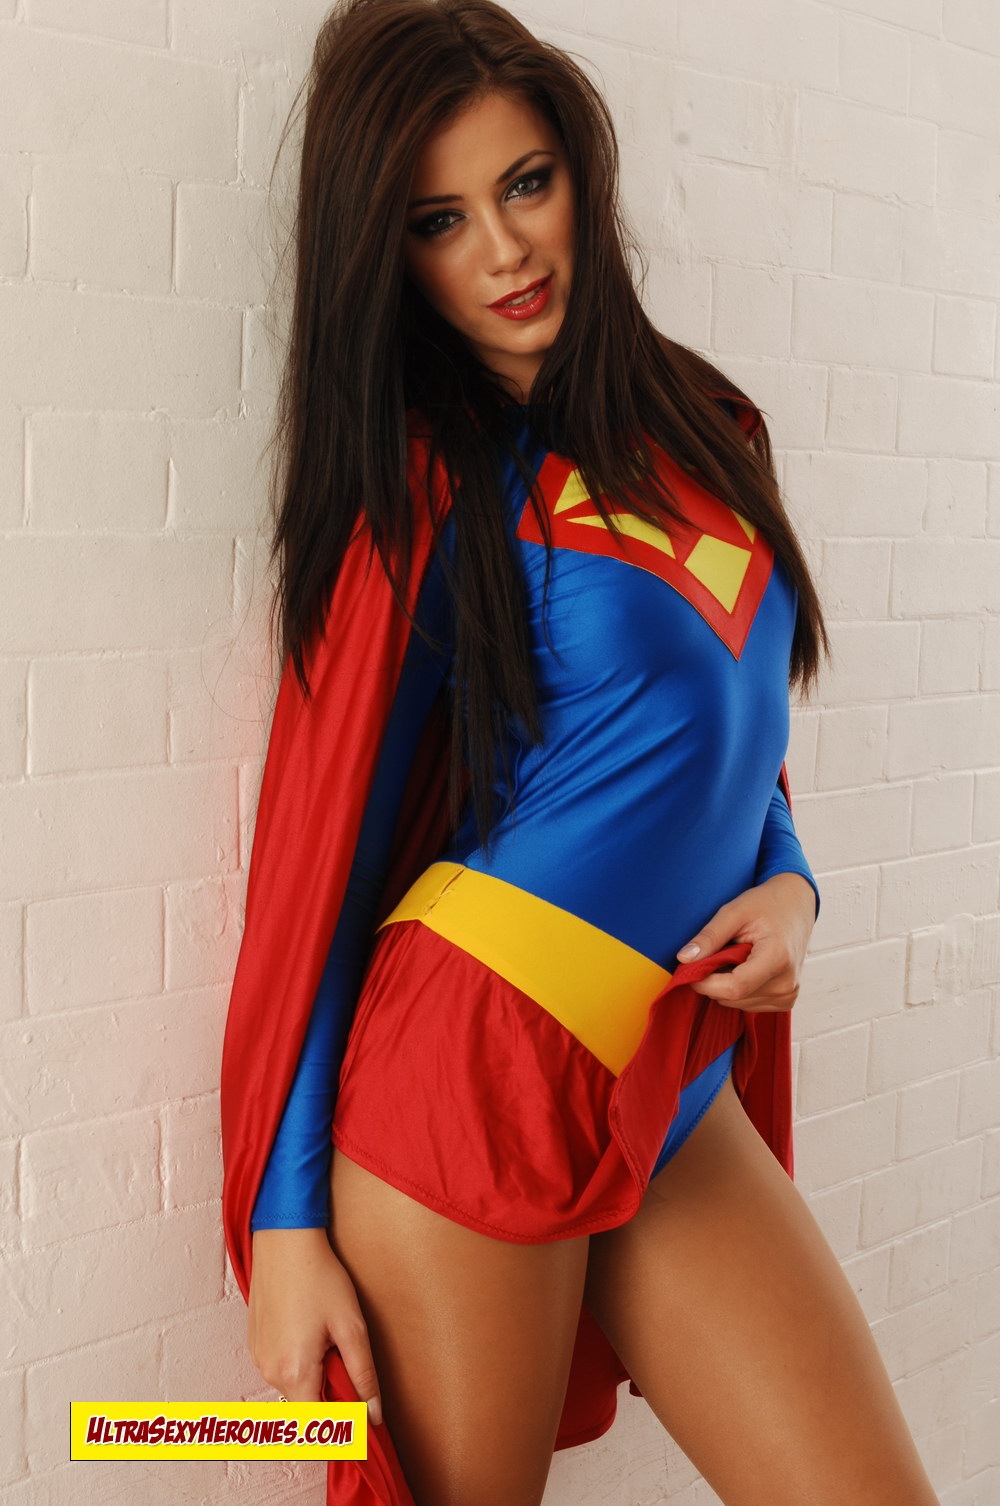 [UltraSexyHeroines] Super Heroine Cosplay Nude - Holly 84